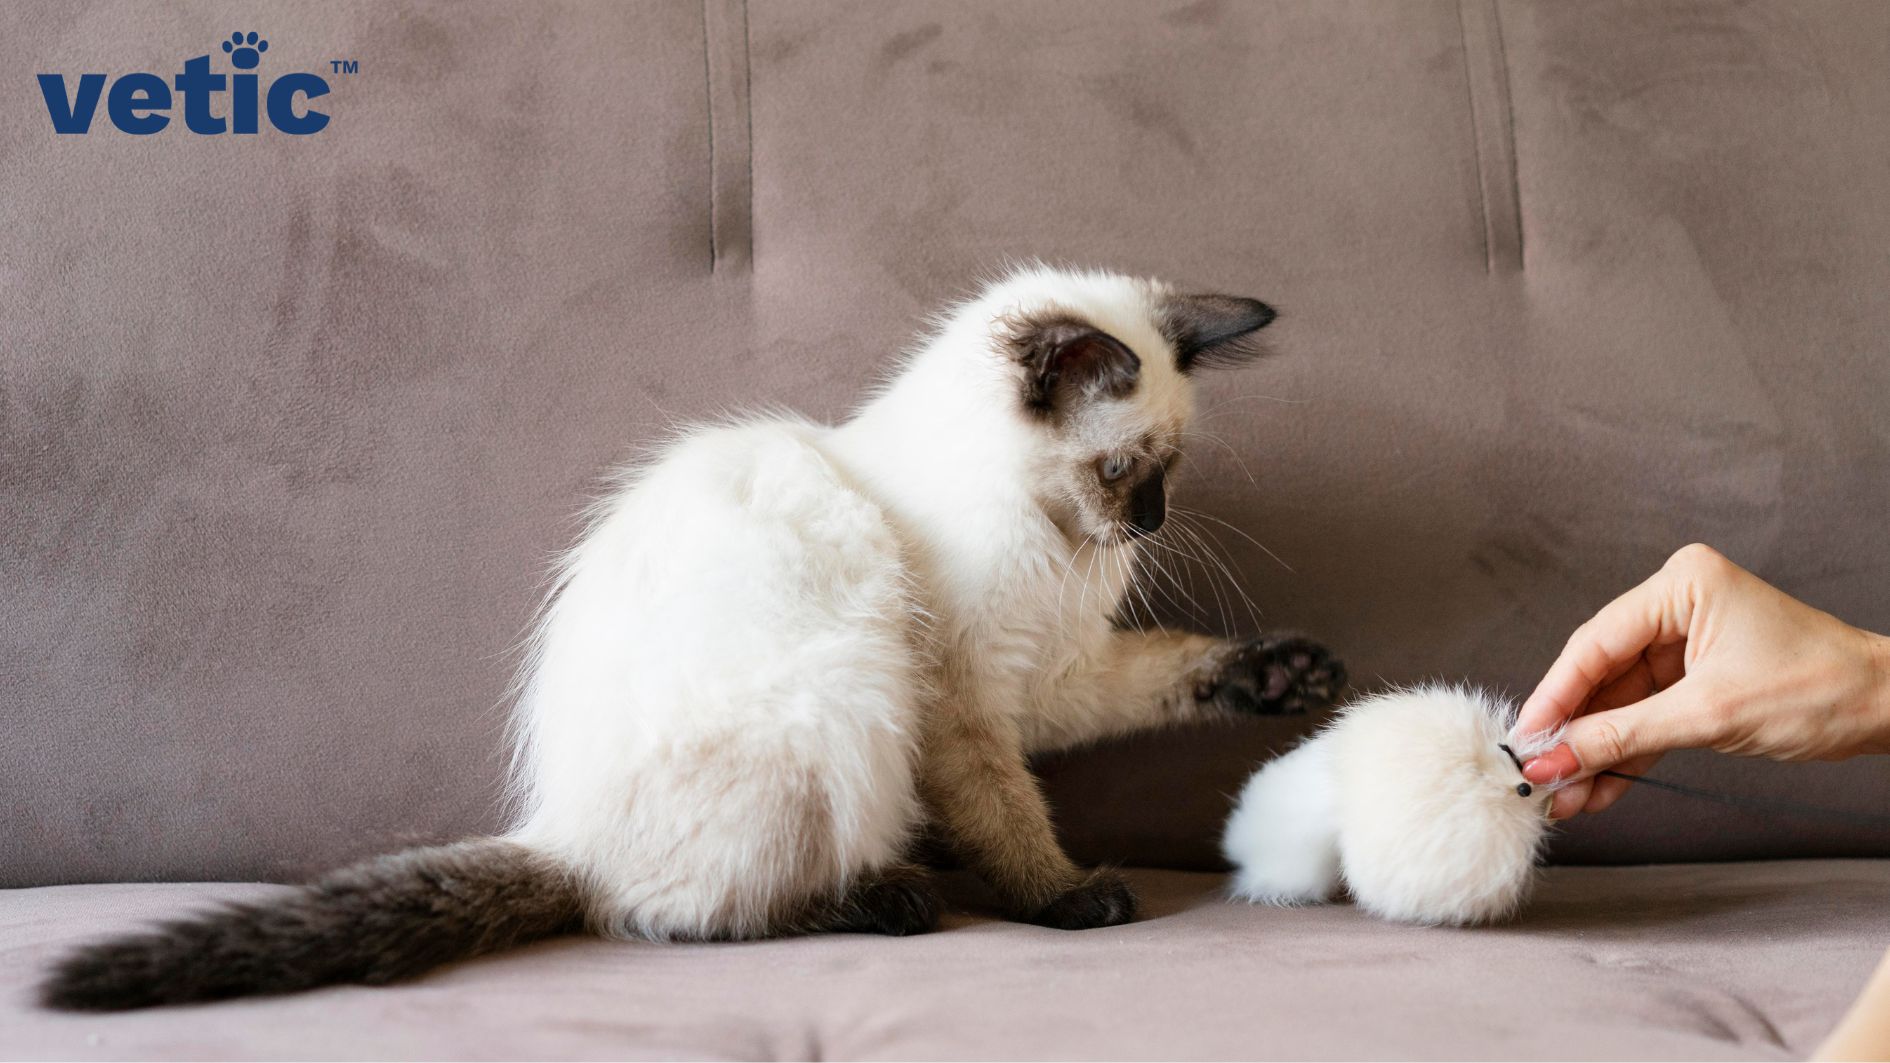 Tiny Himalayan Kitten playing with an interactive toy. Both the kitten and the toy are white. the kitten has the traditional black snout, ears, paws and tail of a himalayan kitten.